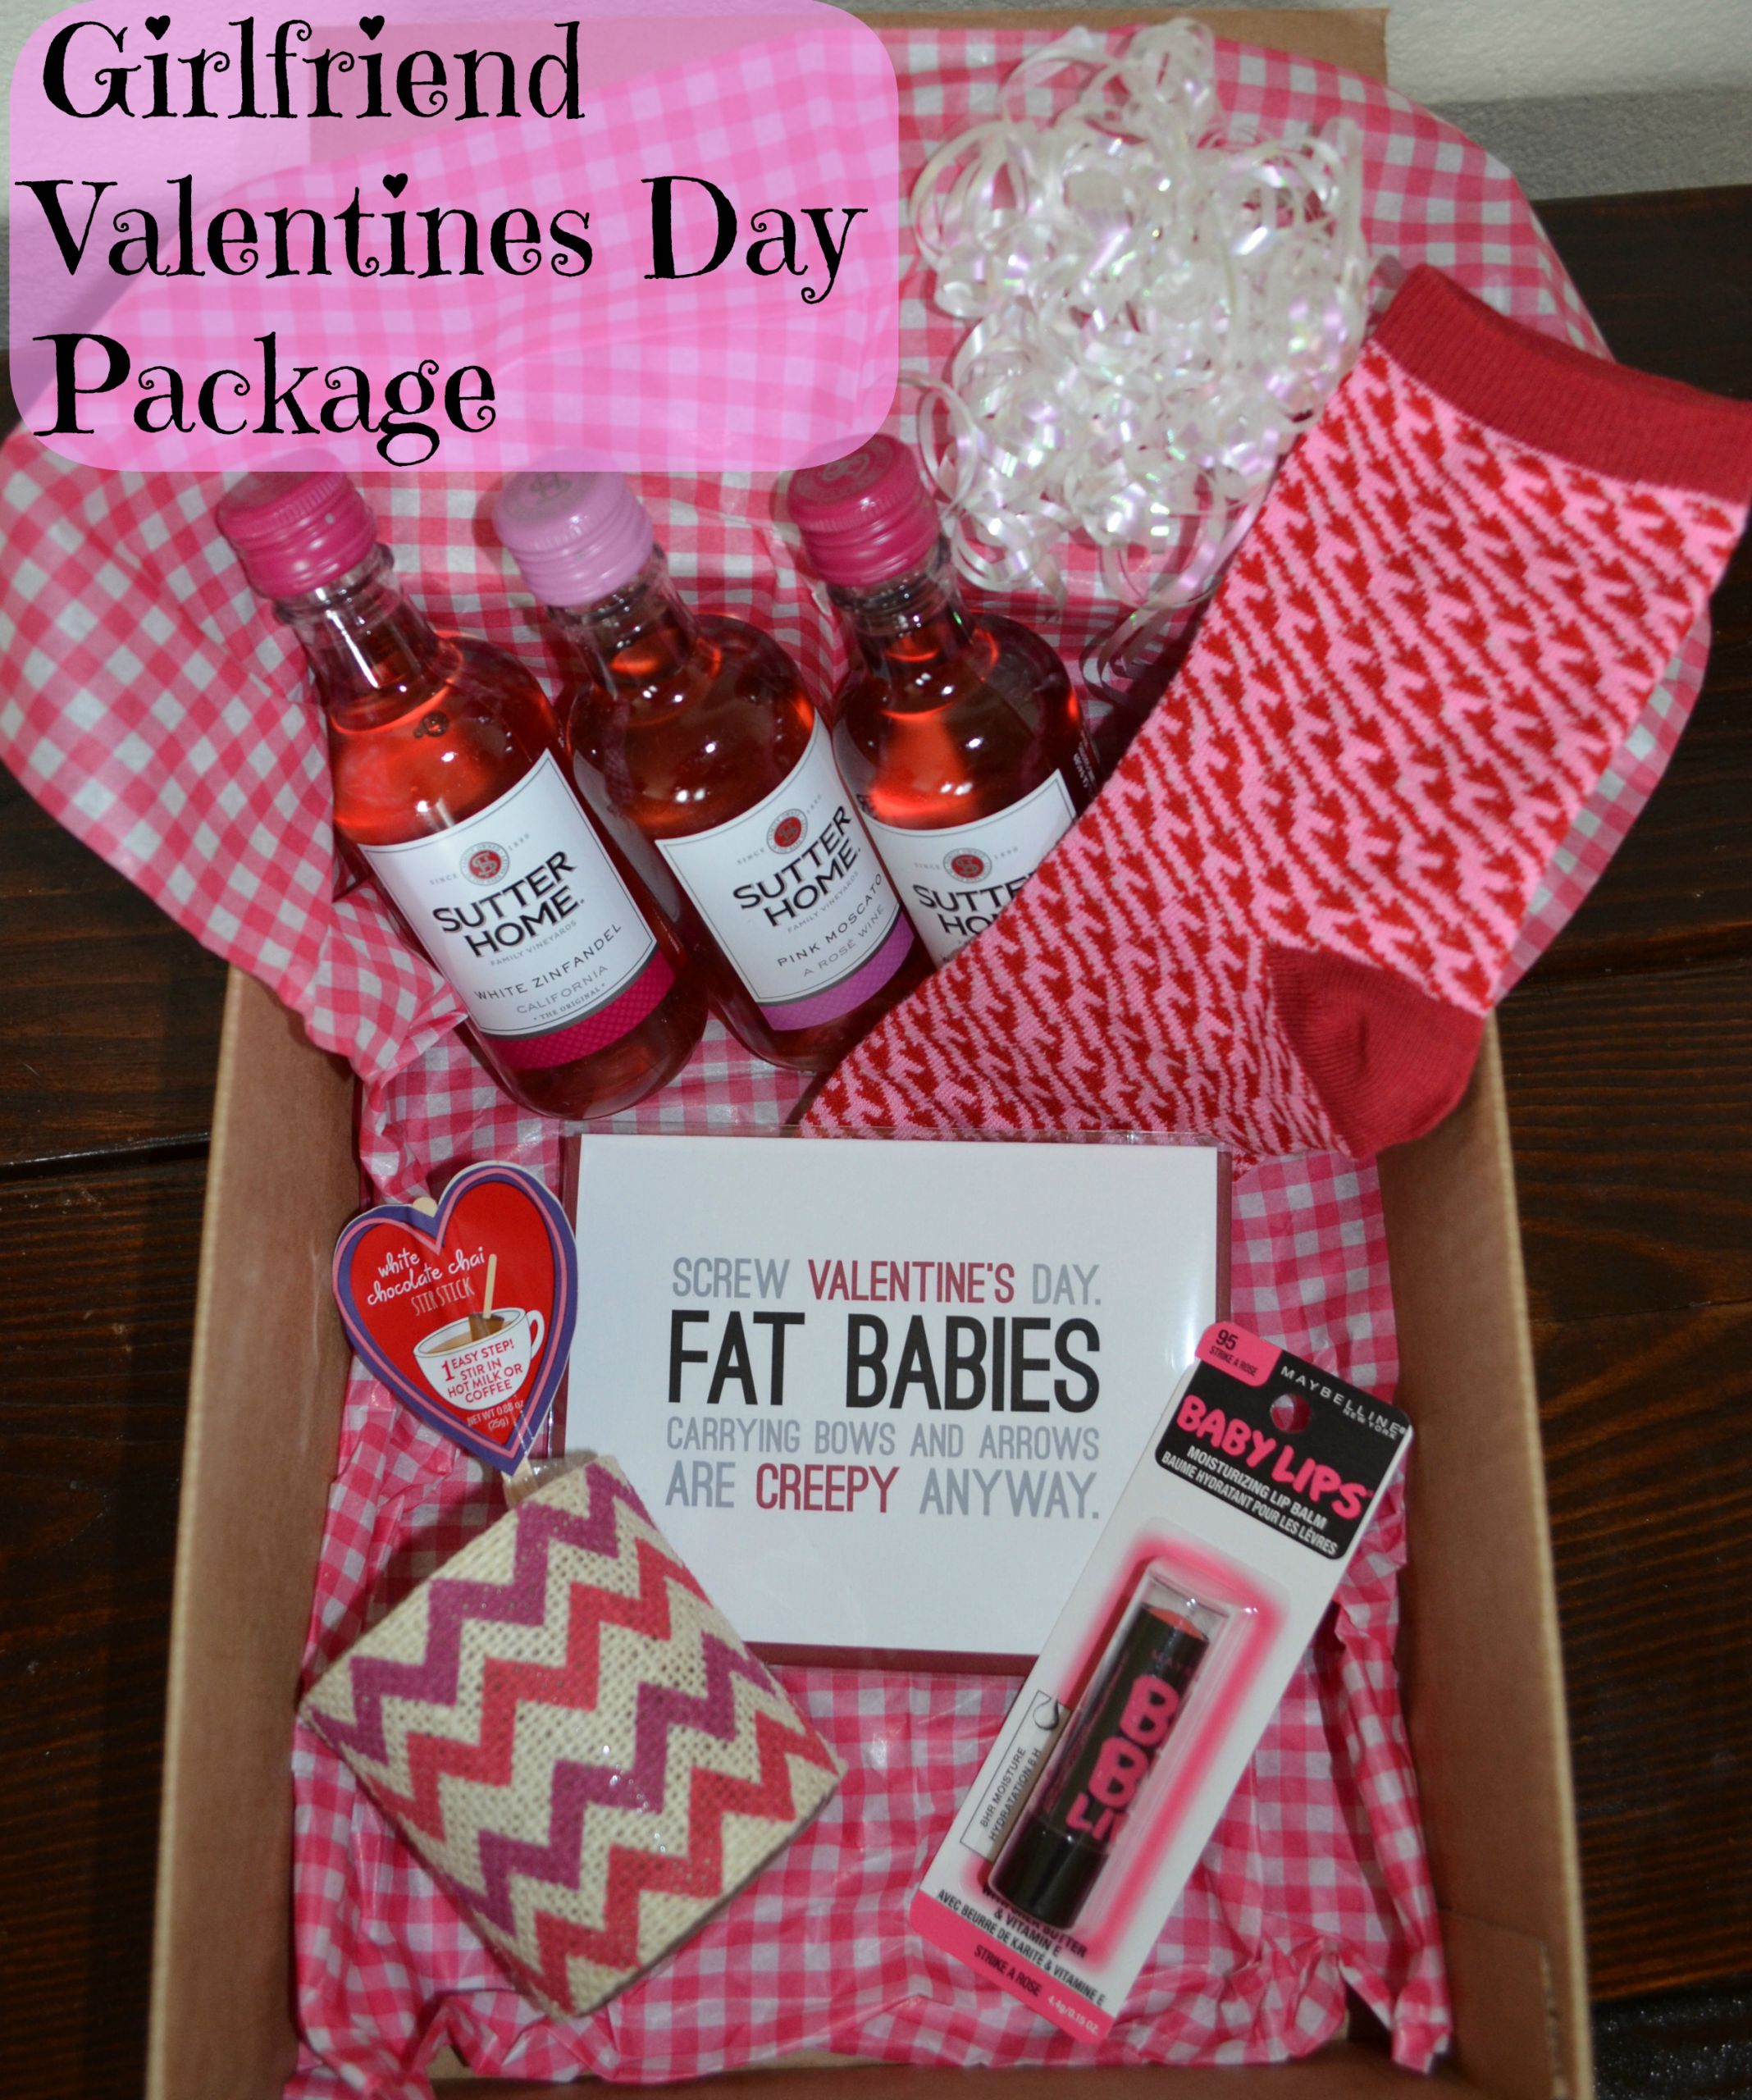 Valentine Day Gift Ideas For Women
 24 ADORABLE GIFT IDEAS FOR THE WOMEN IN YOUR LIFE